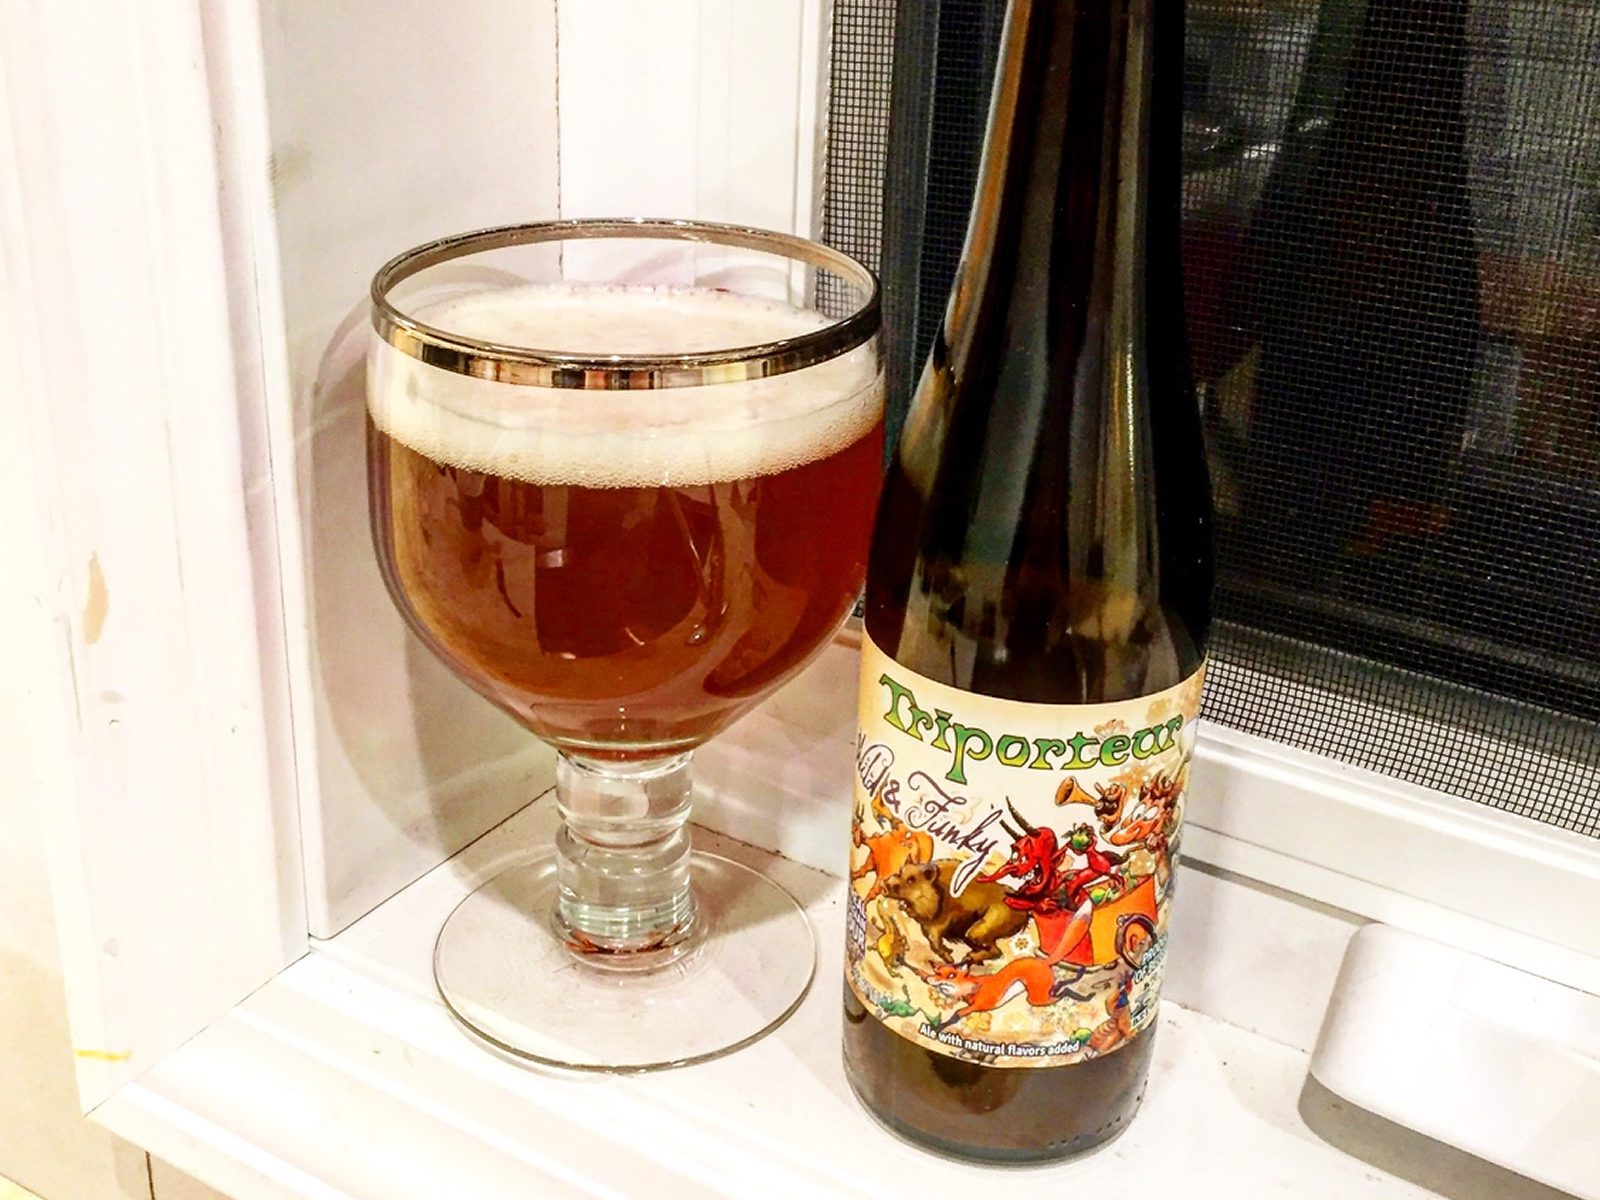 BOM Brewery: Triporteur Wild and Funky